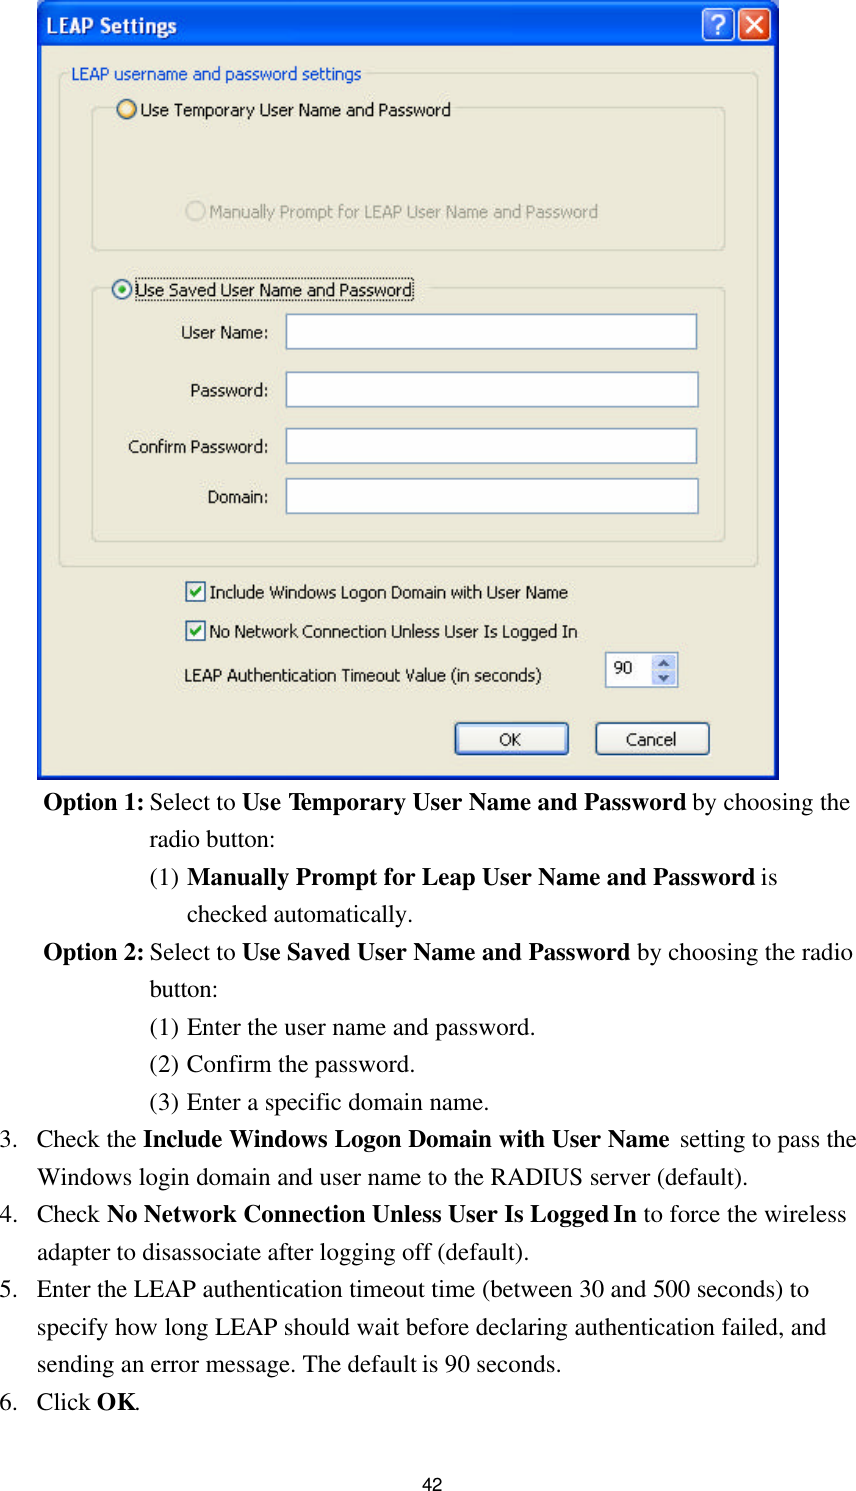 42  Option 1: Select to Use Temporary User Name and Password by choosing the radio button: (1) Manually Prompt for Leap User Name and Password is checked automatically. Option 2: Select to Use Saved User Name and Password by choosing the radio button: (1) Enter the user name and password. (2) Confirm the password. (3) Enter a specific domain name. 3. Check the Include Windows Logon Domain with User Name setting to pass the Windows login domain and user name to the RADIUS server (default). 4. Check No Network Connection Unless User Is Logged In to force the wireless adapter to disassociate after logging off (default). 5. Enter the LEAP authentication timeout time (between 30 and 500 seconds) to specify how long LEAP should wait before declaring authentication failed, and sending an error message. The default is 90 seconds. 6. Click OK. 